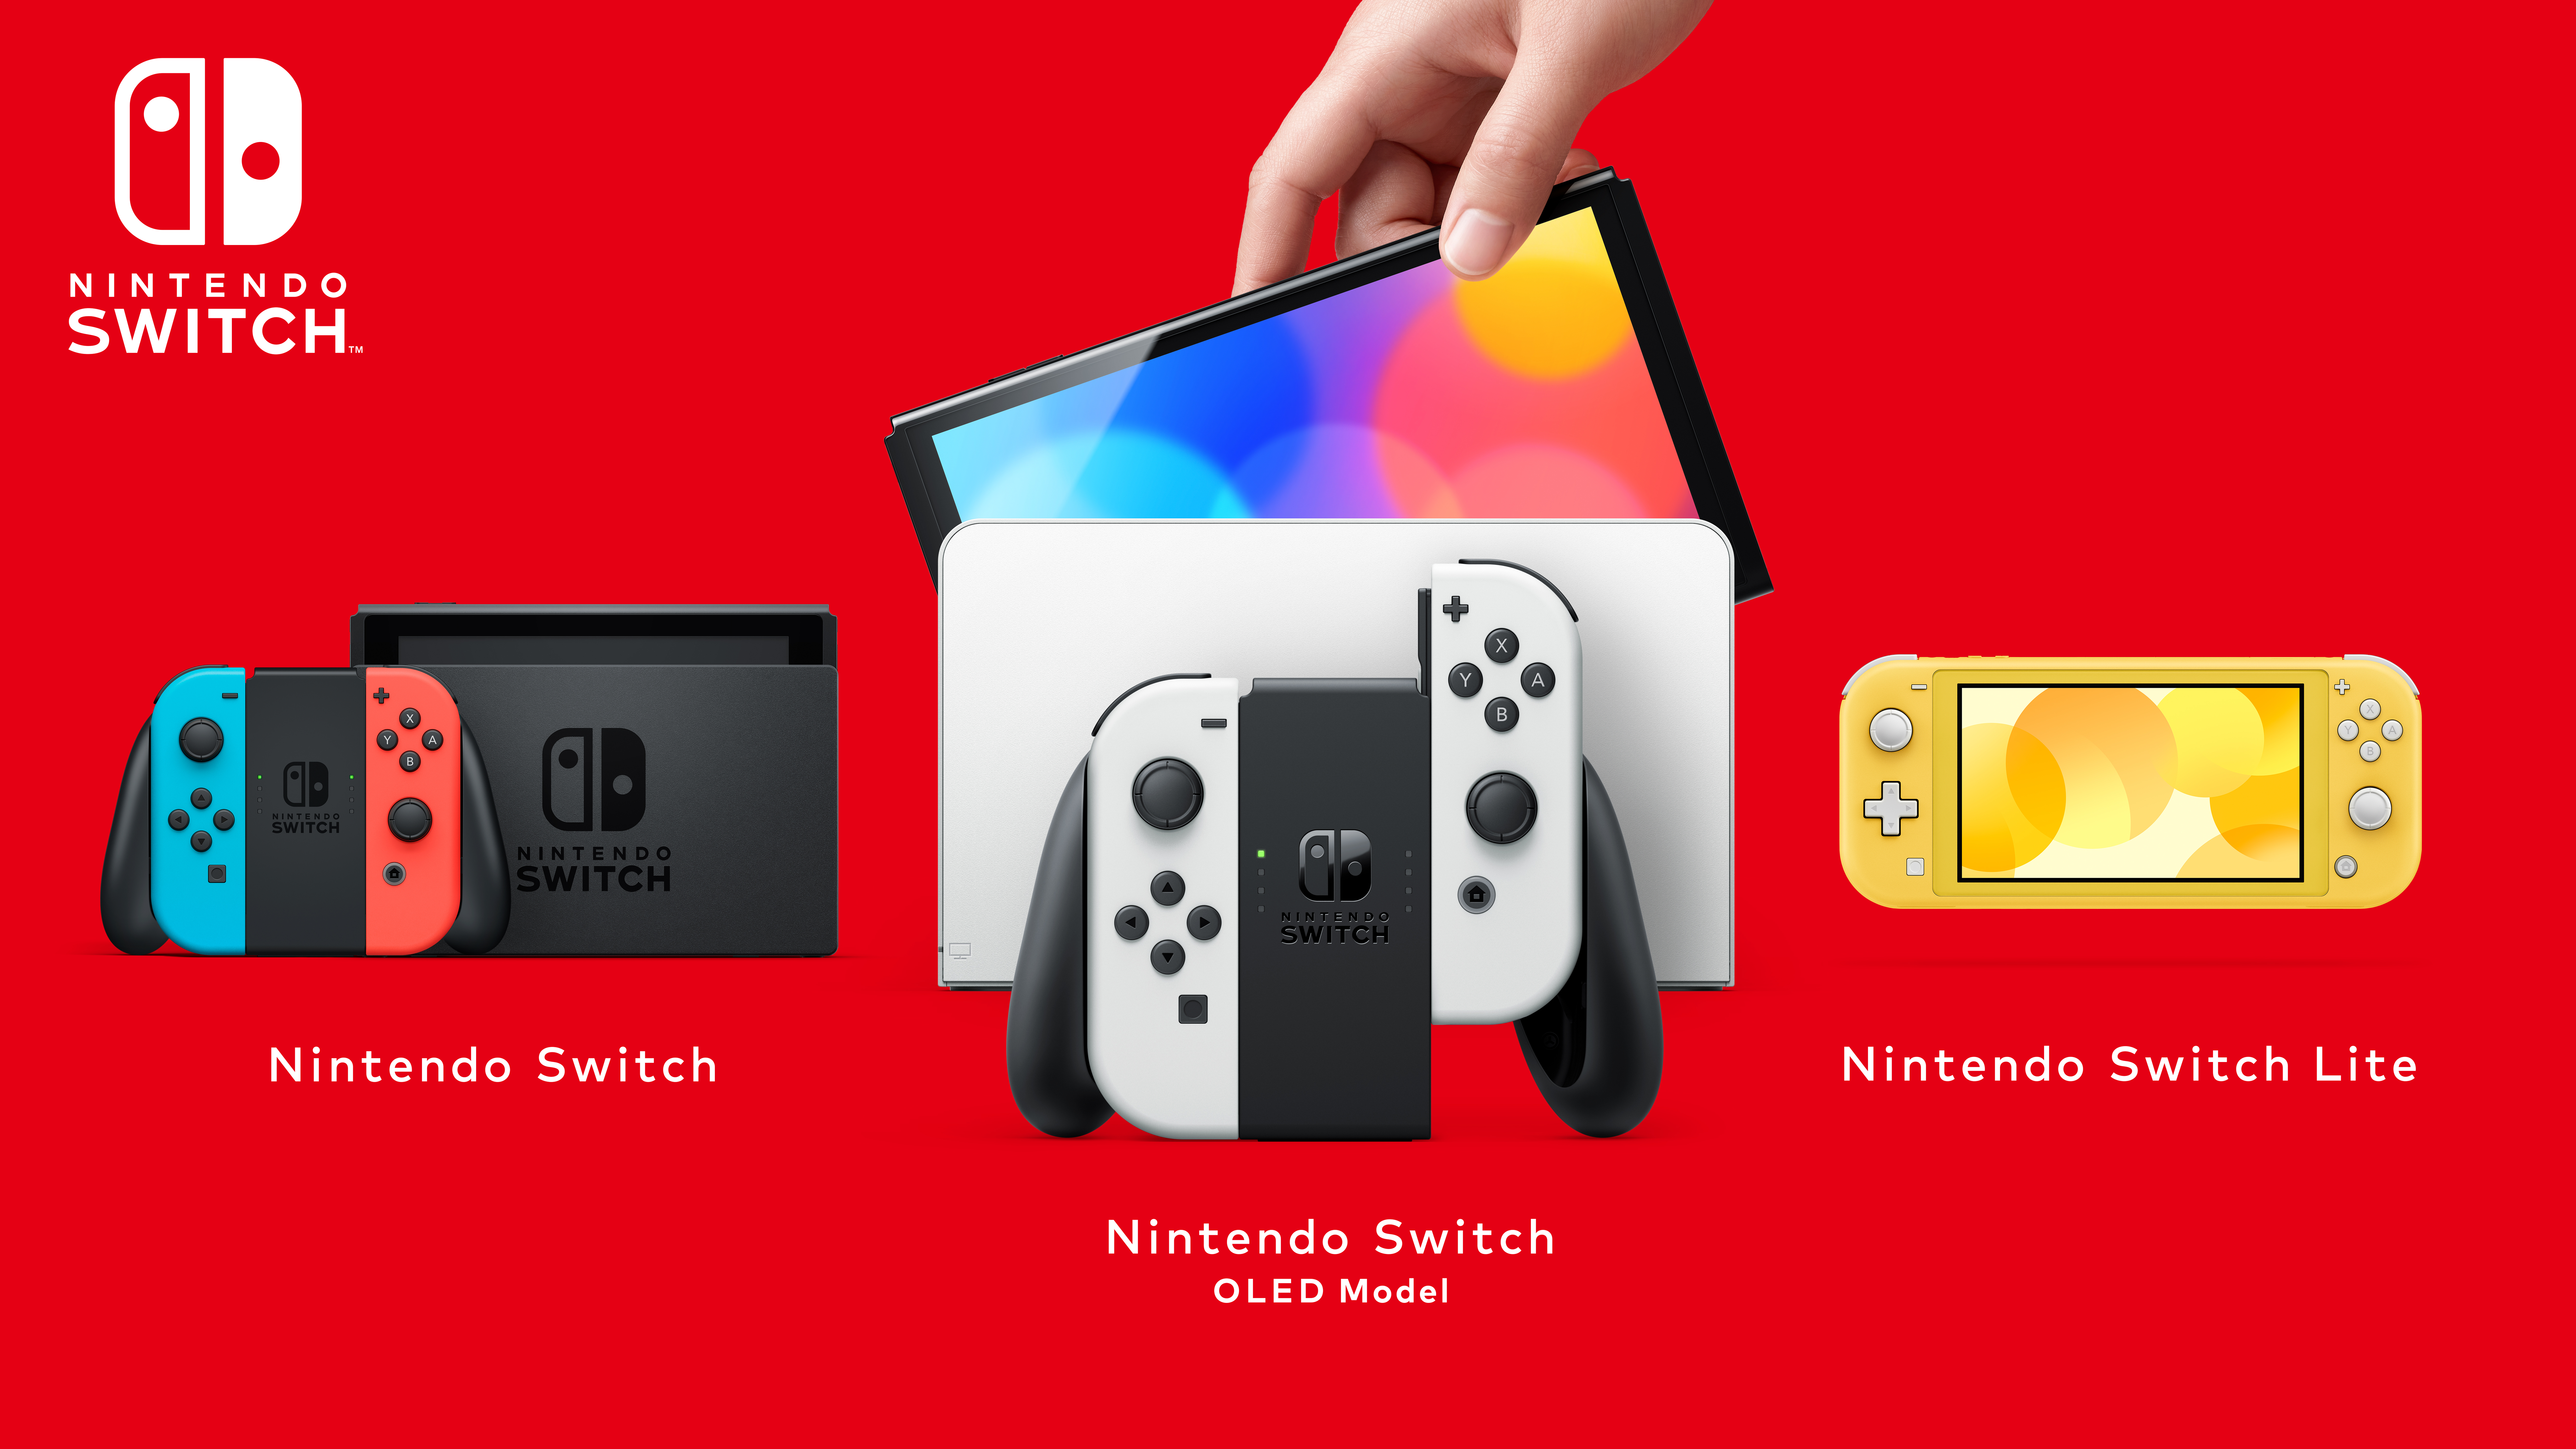 Nintendo Switch trade in price, Best offers for all models